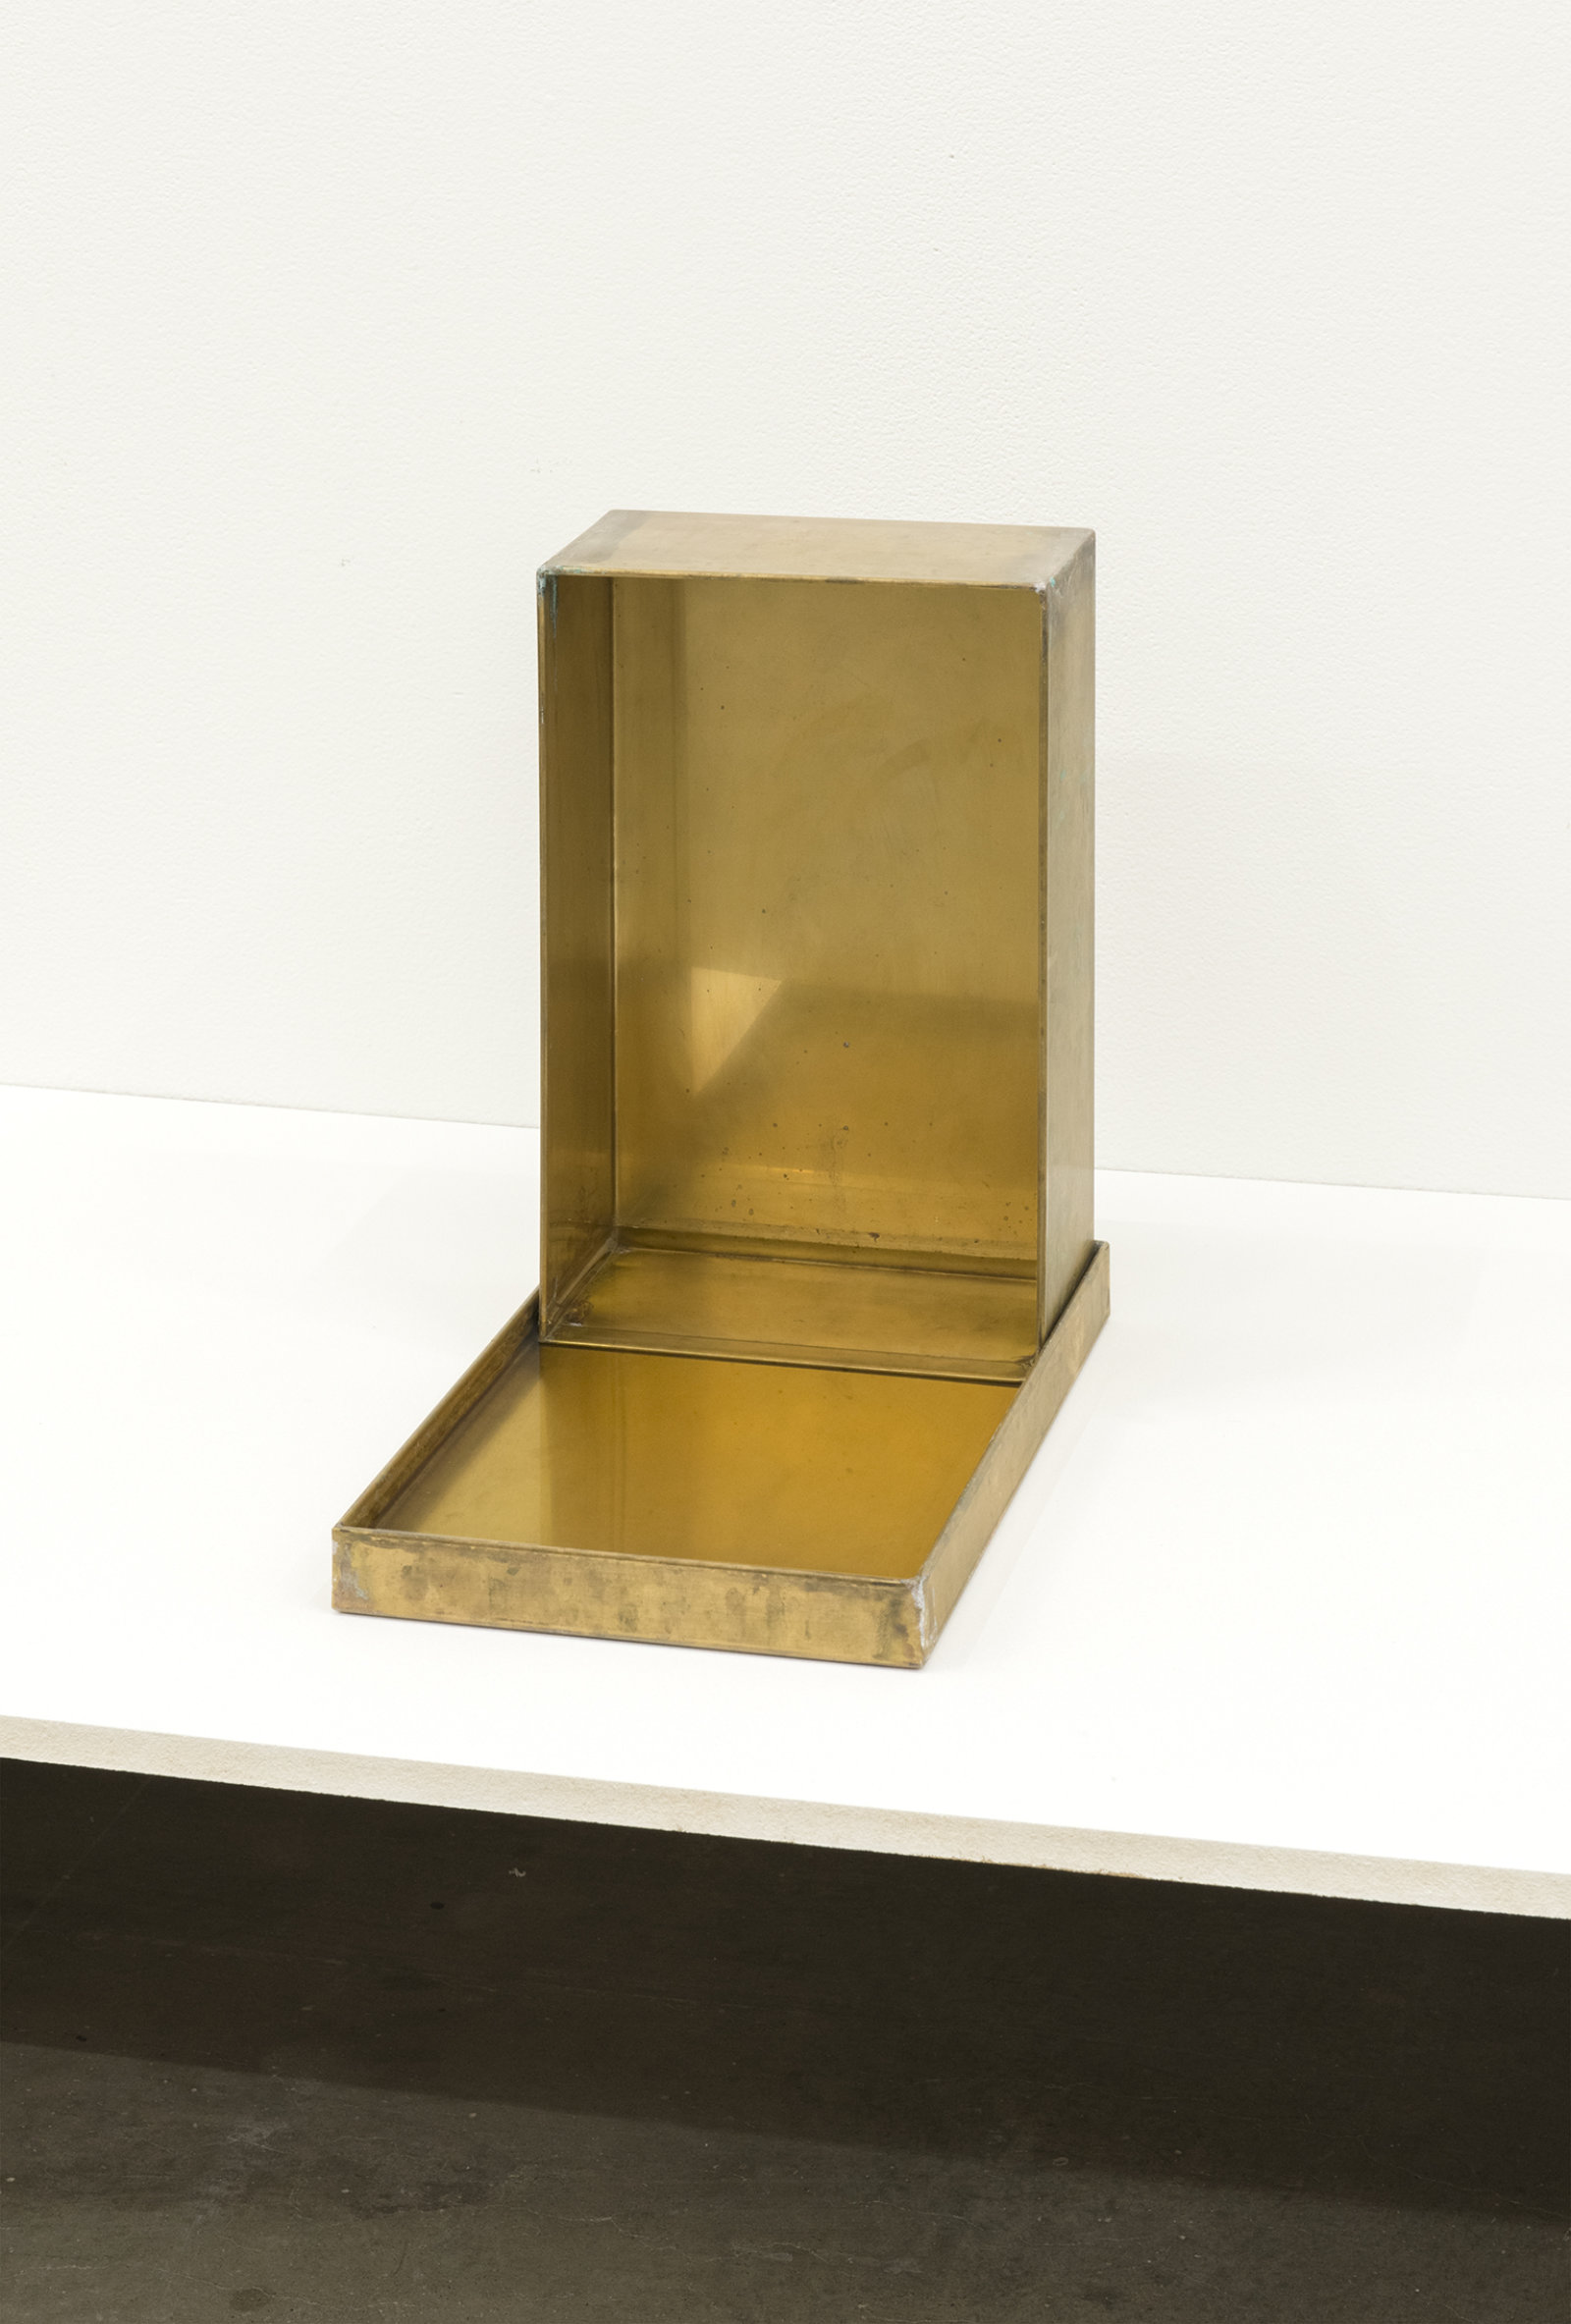 Ashes Withyman, Shoe Box shrine, 2014, bronze, glass, metal, wood, candle, 12 x 7 x 13 in. (30 x 17 x 33 cm)